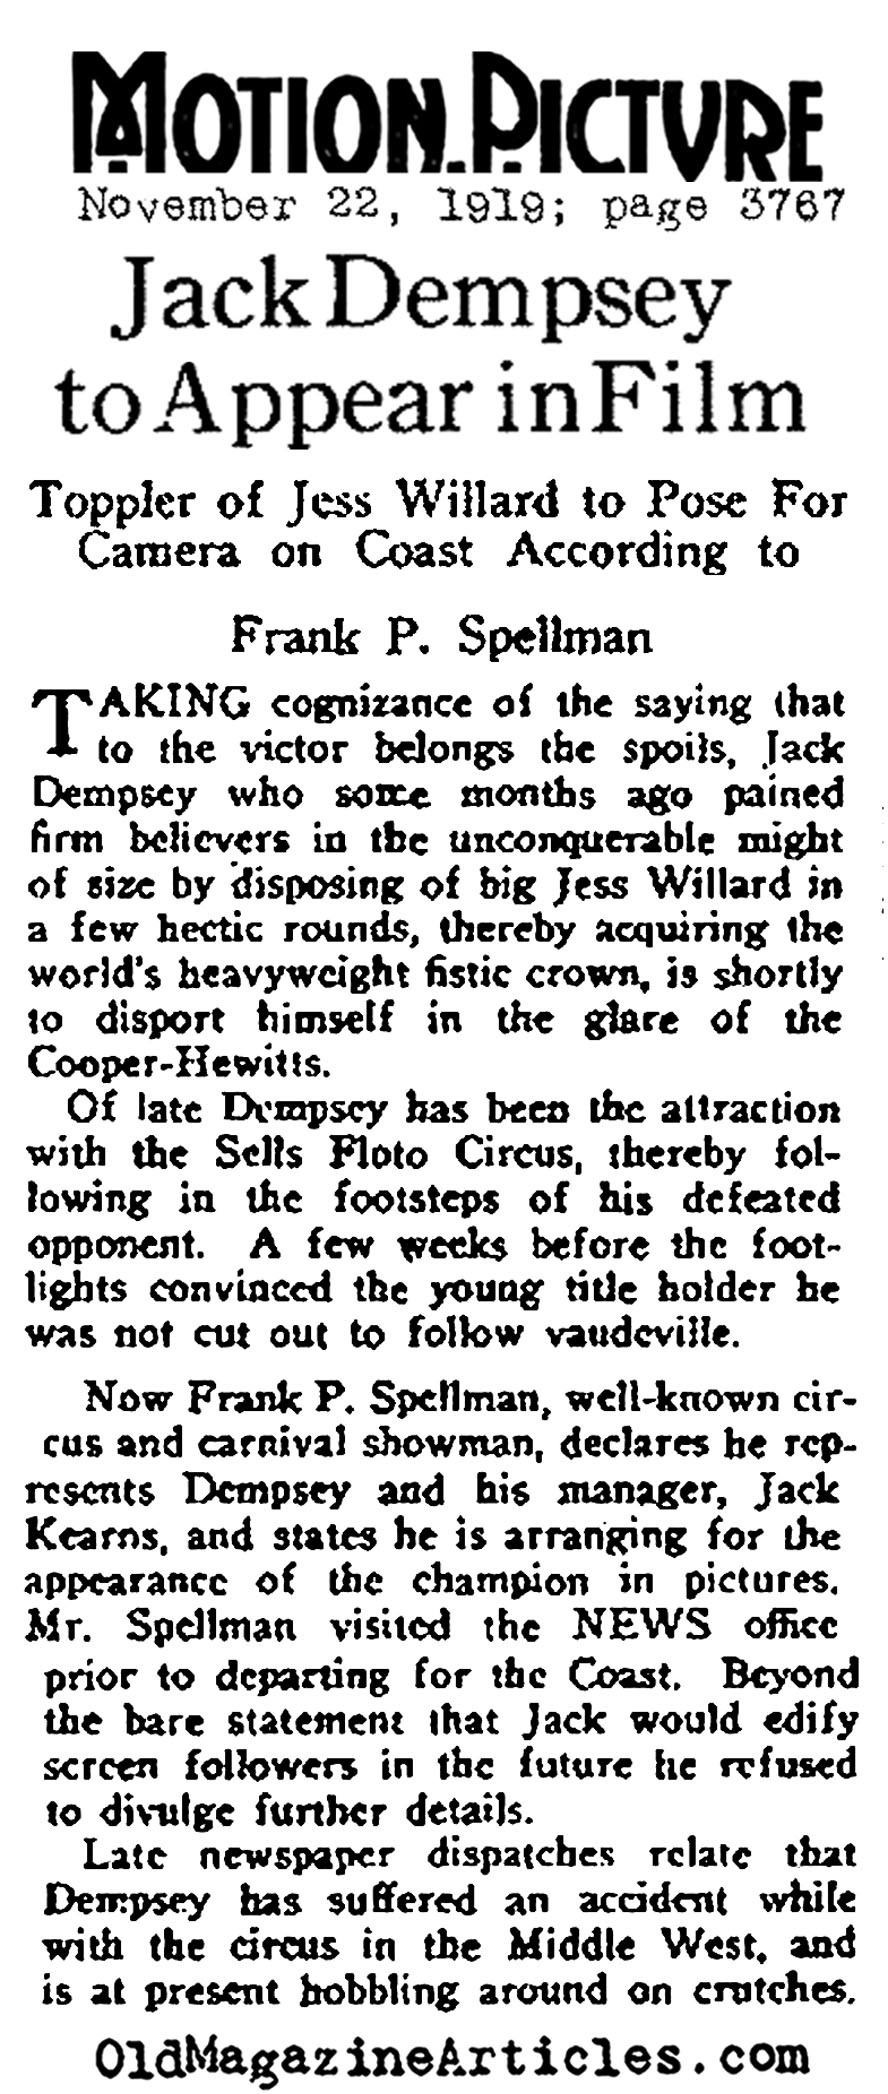 Jack Dempsey In Silent Movies  (Motion Picture News & Vanity Fair, 1919)